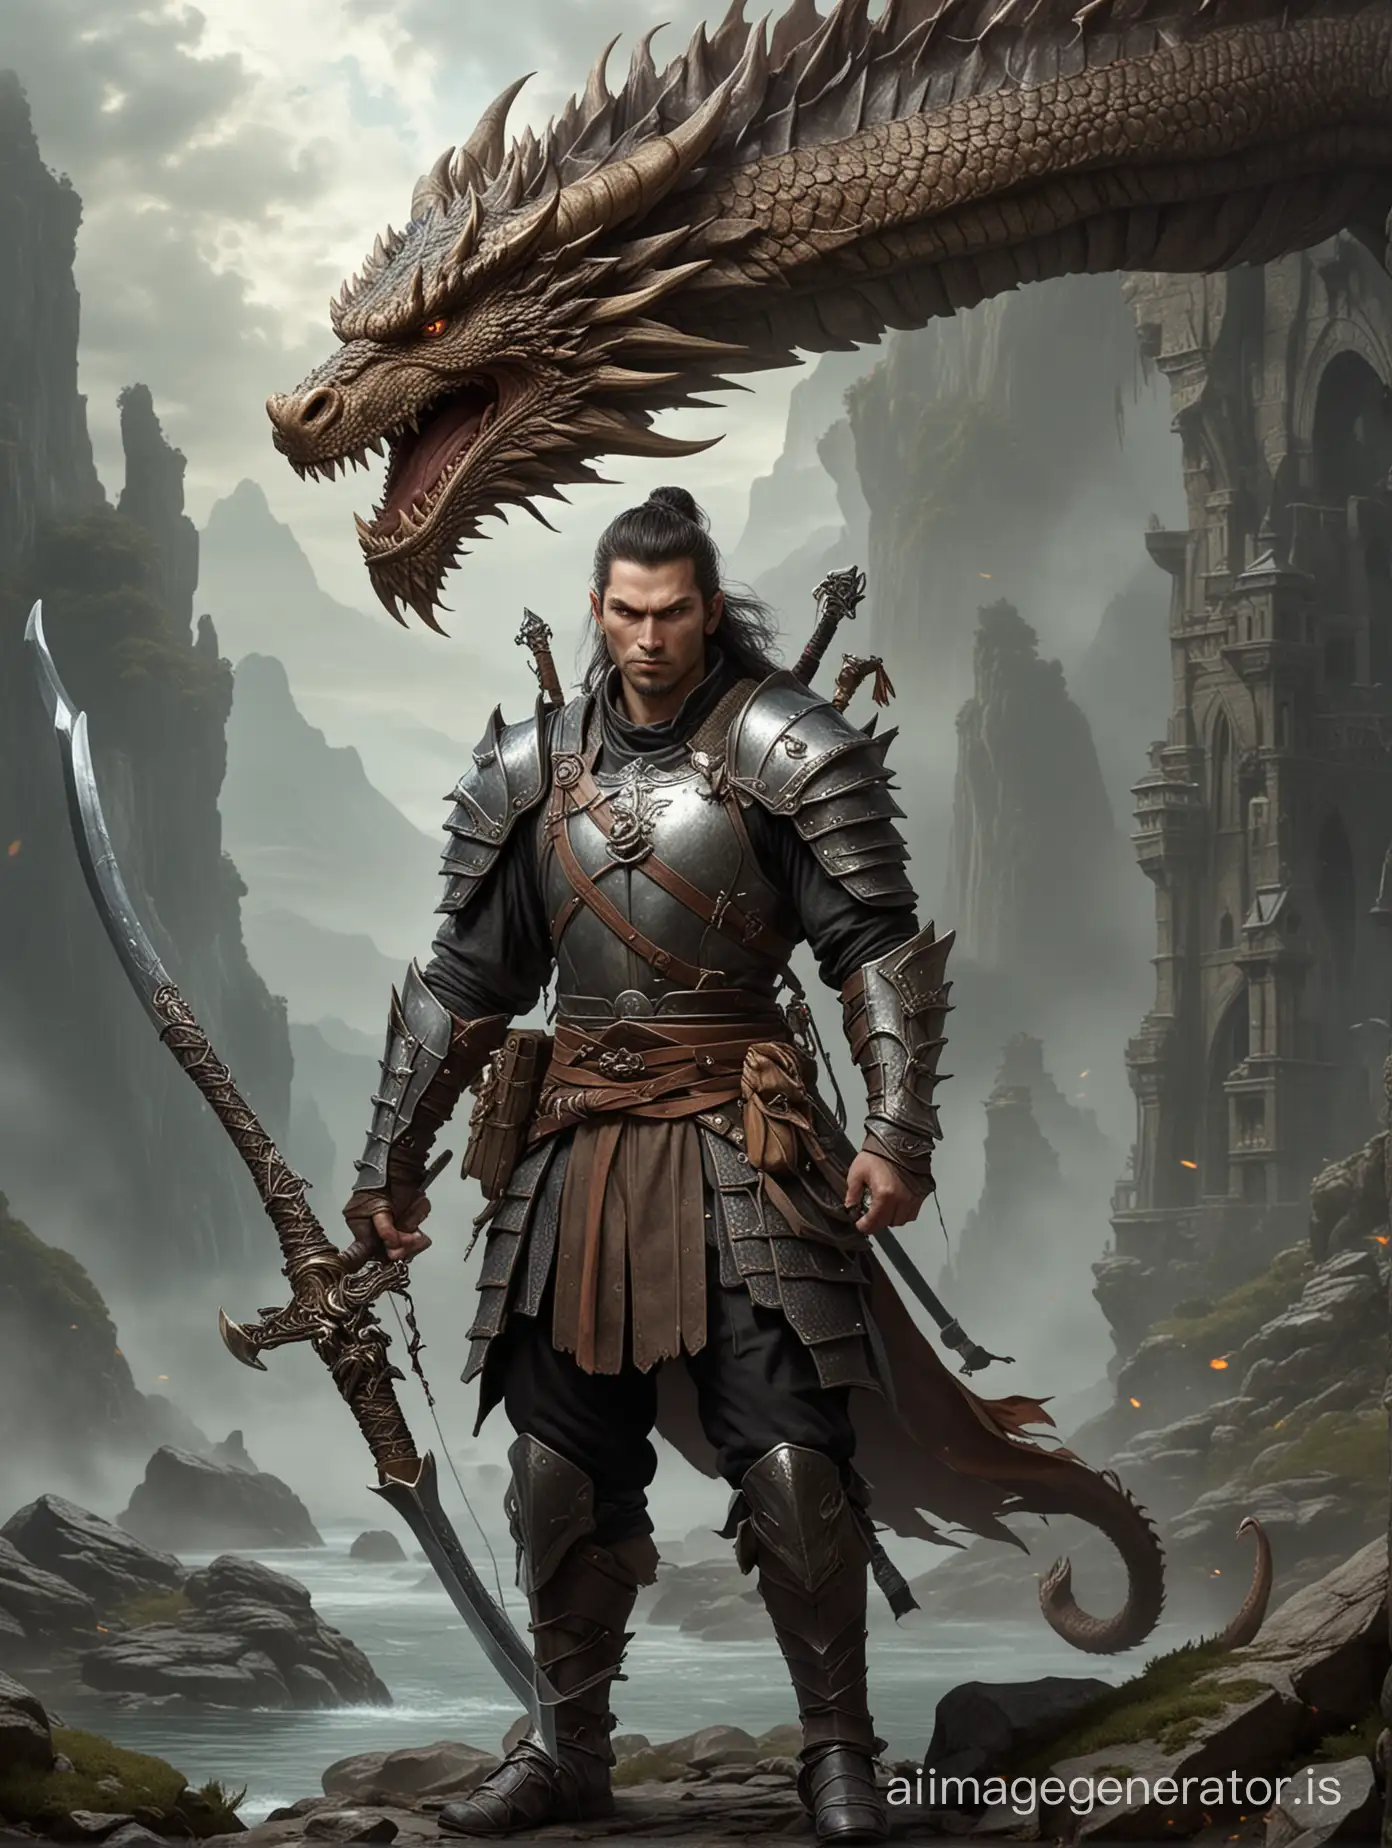 large male with dragon head. carrying sword and a bow. fantasy setting